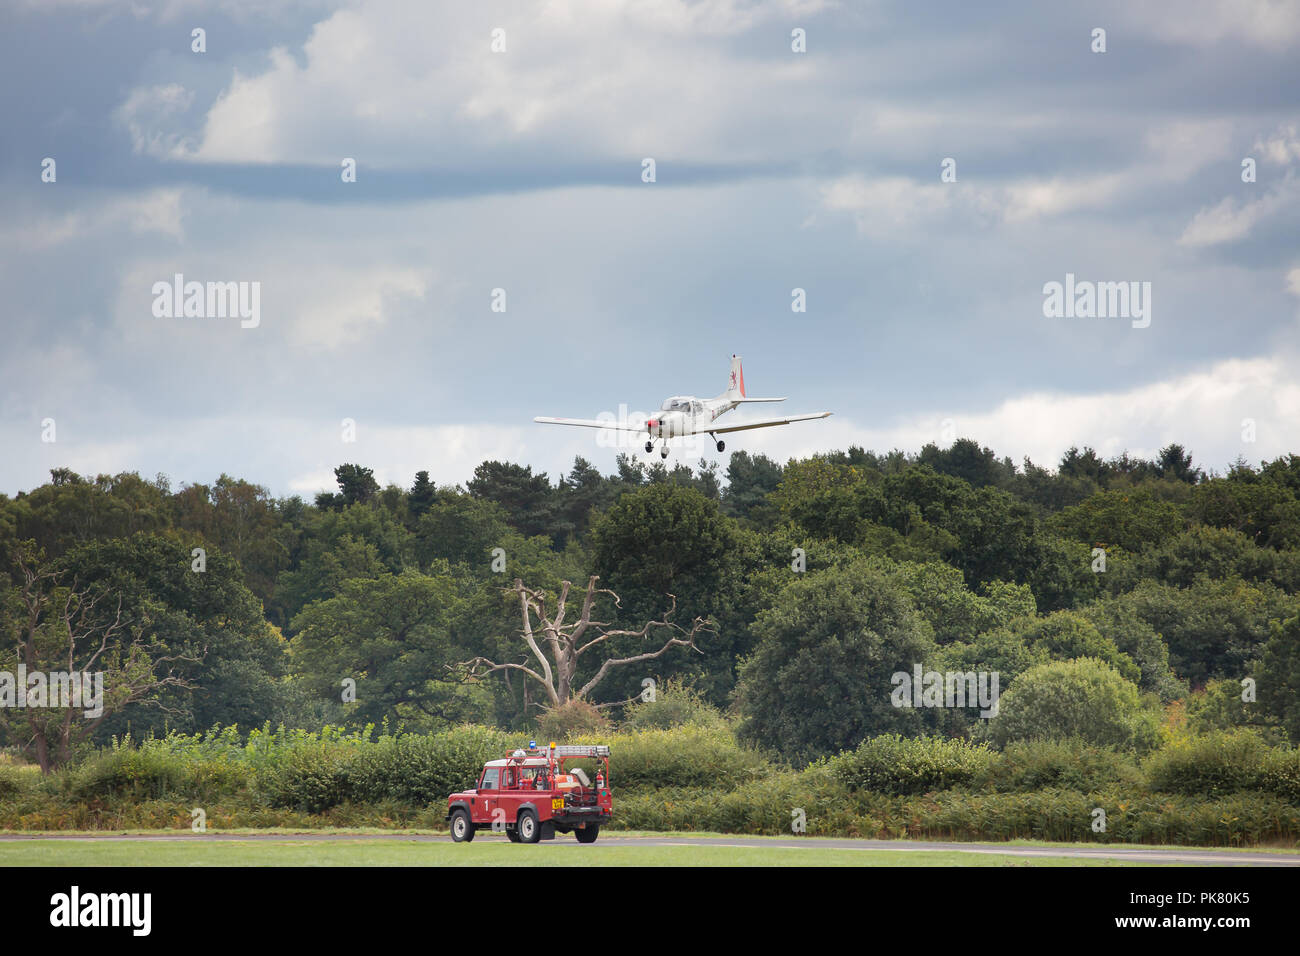 Landscape shot of a light aircraft, in the sky, coming in to land, UK. Stock Photo